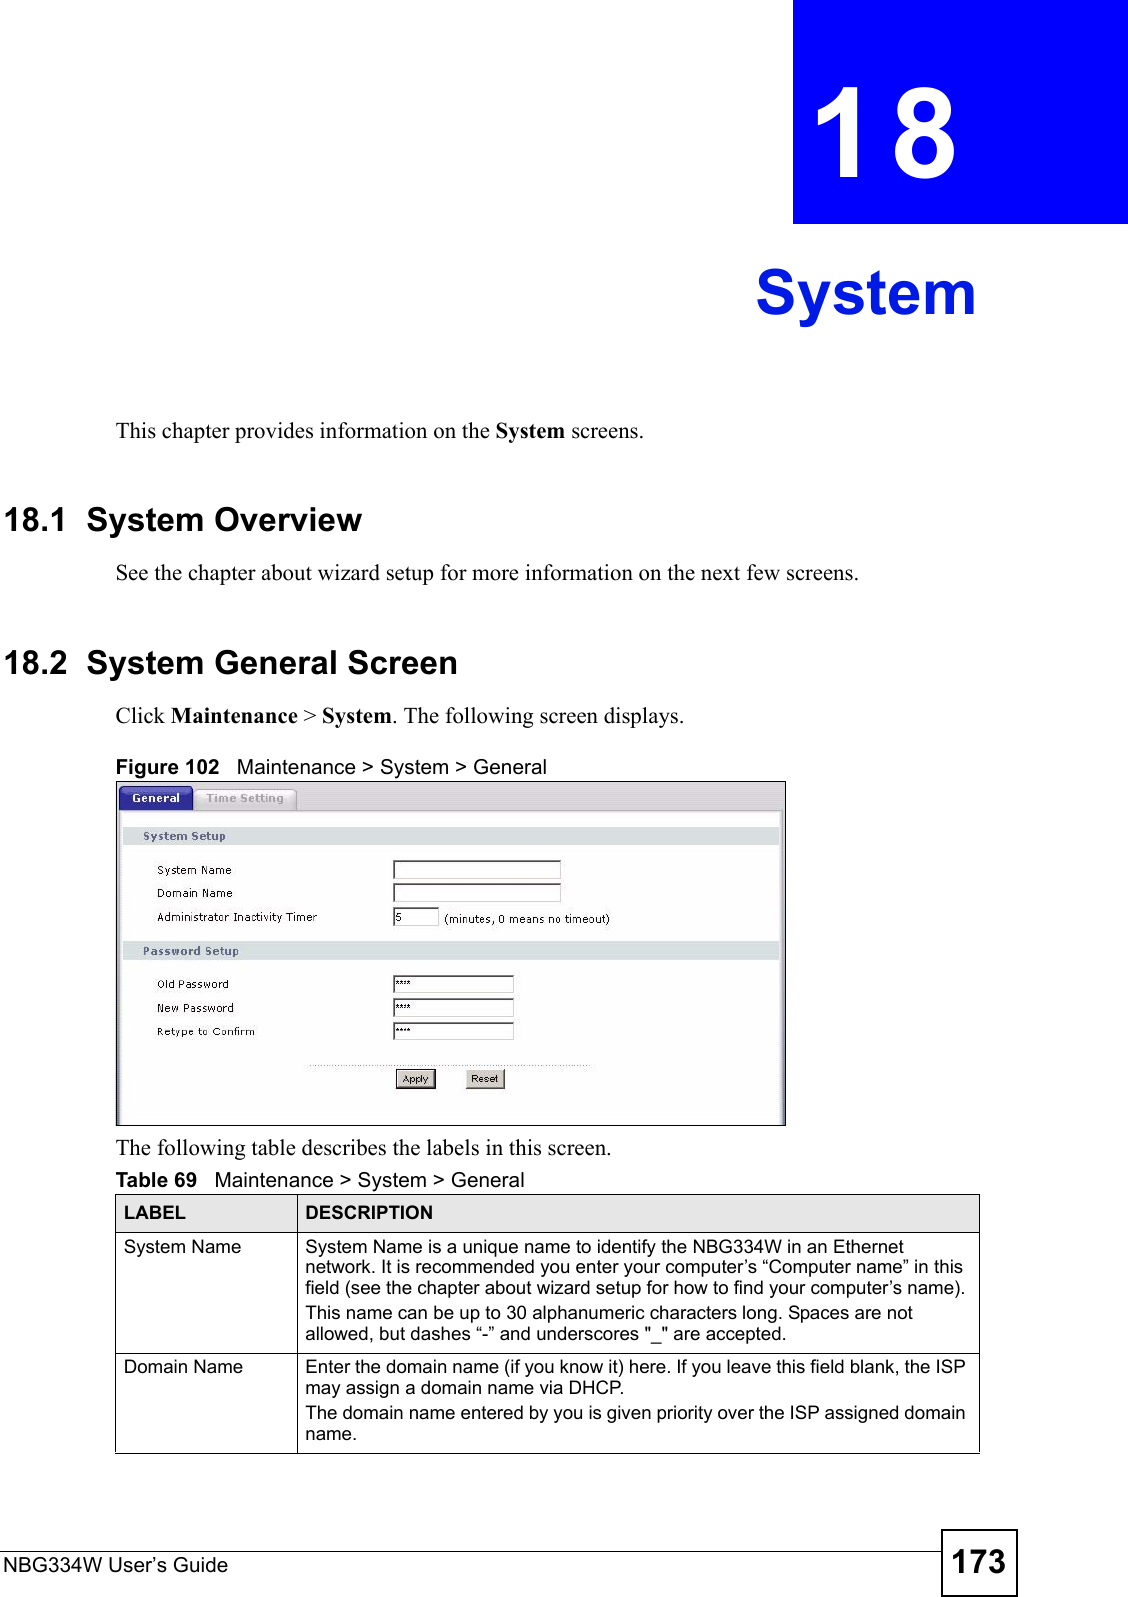 NBG334W User’s Guide 173CHAPTER  18 SystemThis chapter provides information on the System screens. 18.1  System OverviewSee the chapter about wizard setup for more information on the next few screens.18.2  System General Screen Click Maintenance &gt; System. The following screen displays.Figure 102   Maintenance &gt; System &gt; General The following table describes the labels in this screen.Table 69   Maintenance &gt; System &gt; GeneralLABEL DESCRIPTIONSystem Name System Name is a unique name to identify the NBG334W in an Ethernet network. It is recommended you enter your computer’s “Computer name” in this field (see the chapter about wizard setup for how to find your computer’s name). This name can be up to 30 alphanumeric characters long. Spaces are not allowed, but dashes “-” and underscores &quot;_&quot; are accepted.Domain Name Enter the domain name (if you know it) here. If you leave this field blank, the ISP may assign a domain name via DHCP. The domain name entered by you is given priority over the ISP assigned domain name.